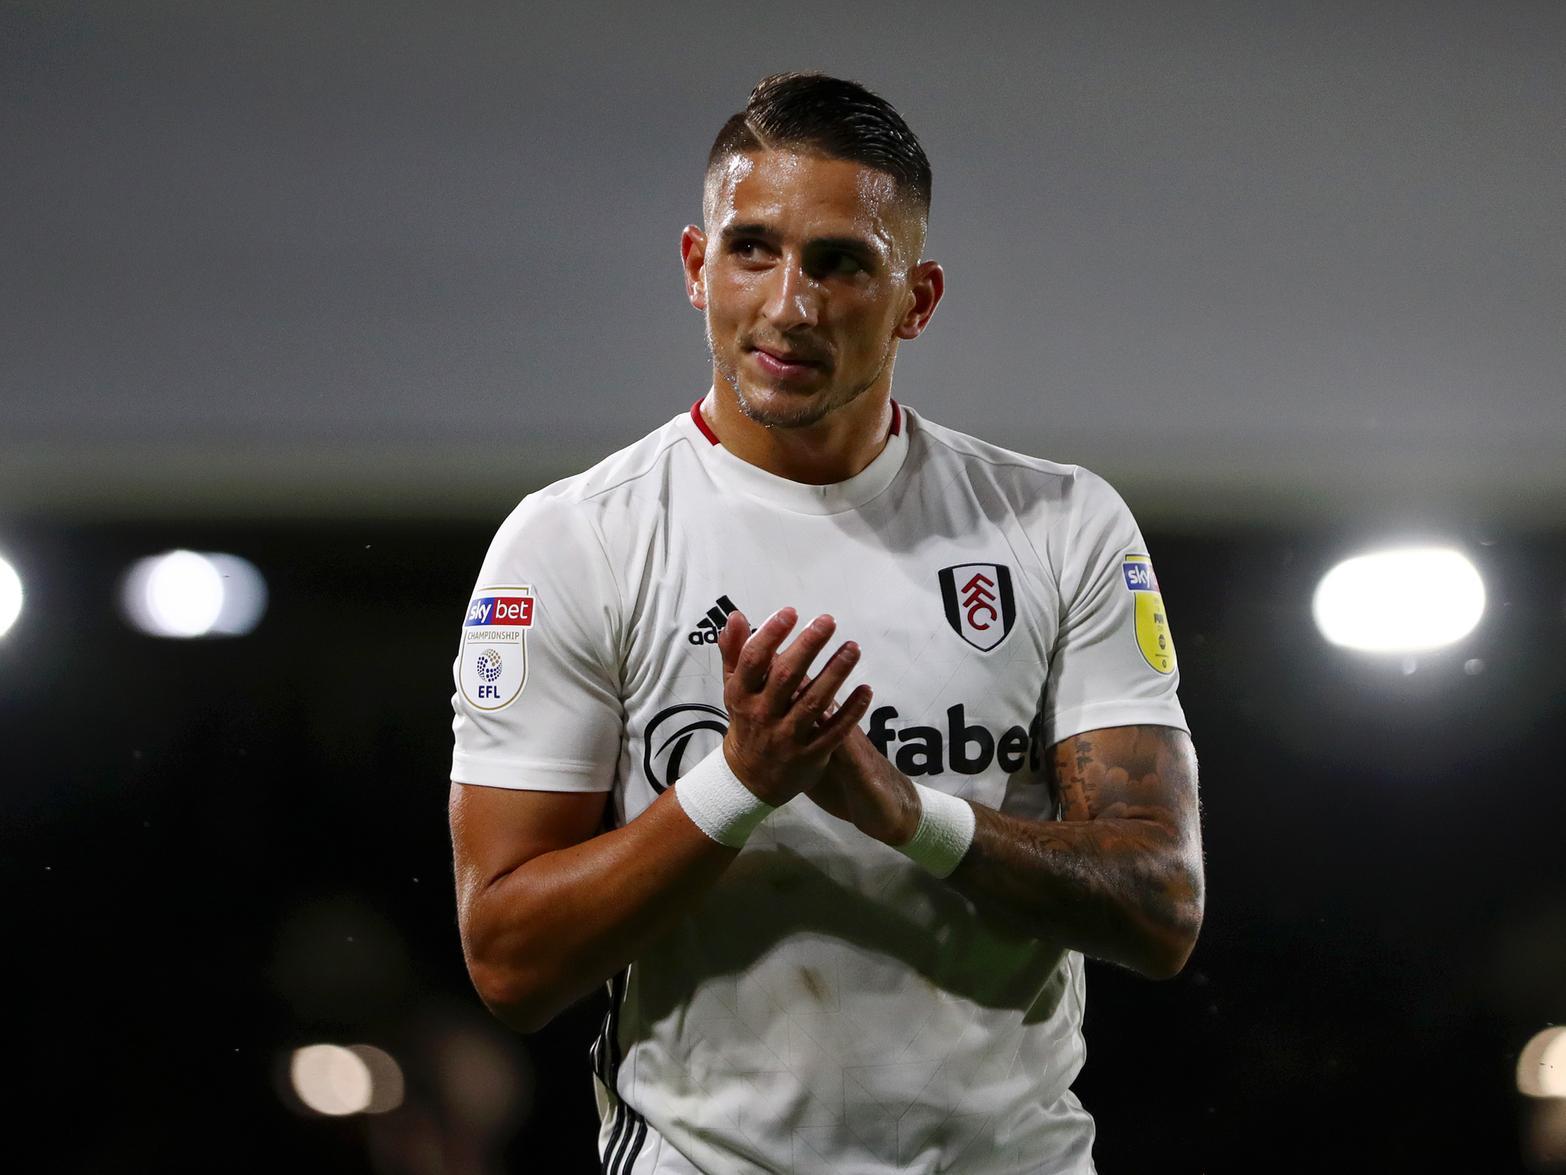 Fulham will listen to offers for him (The Athletic)